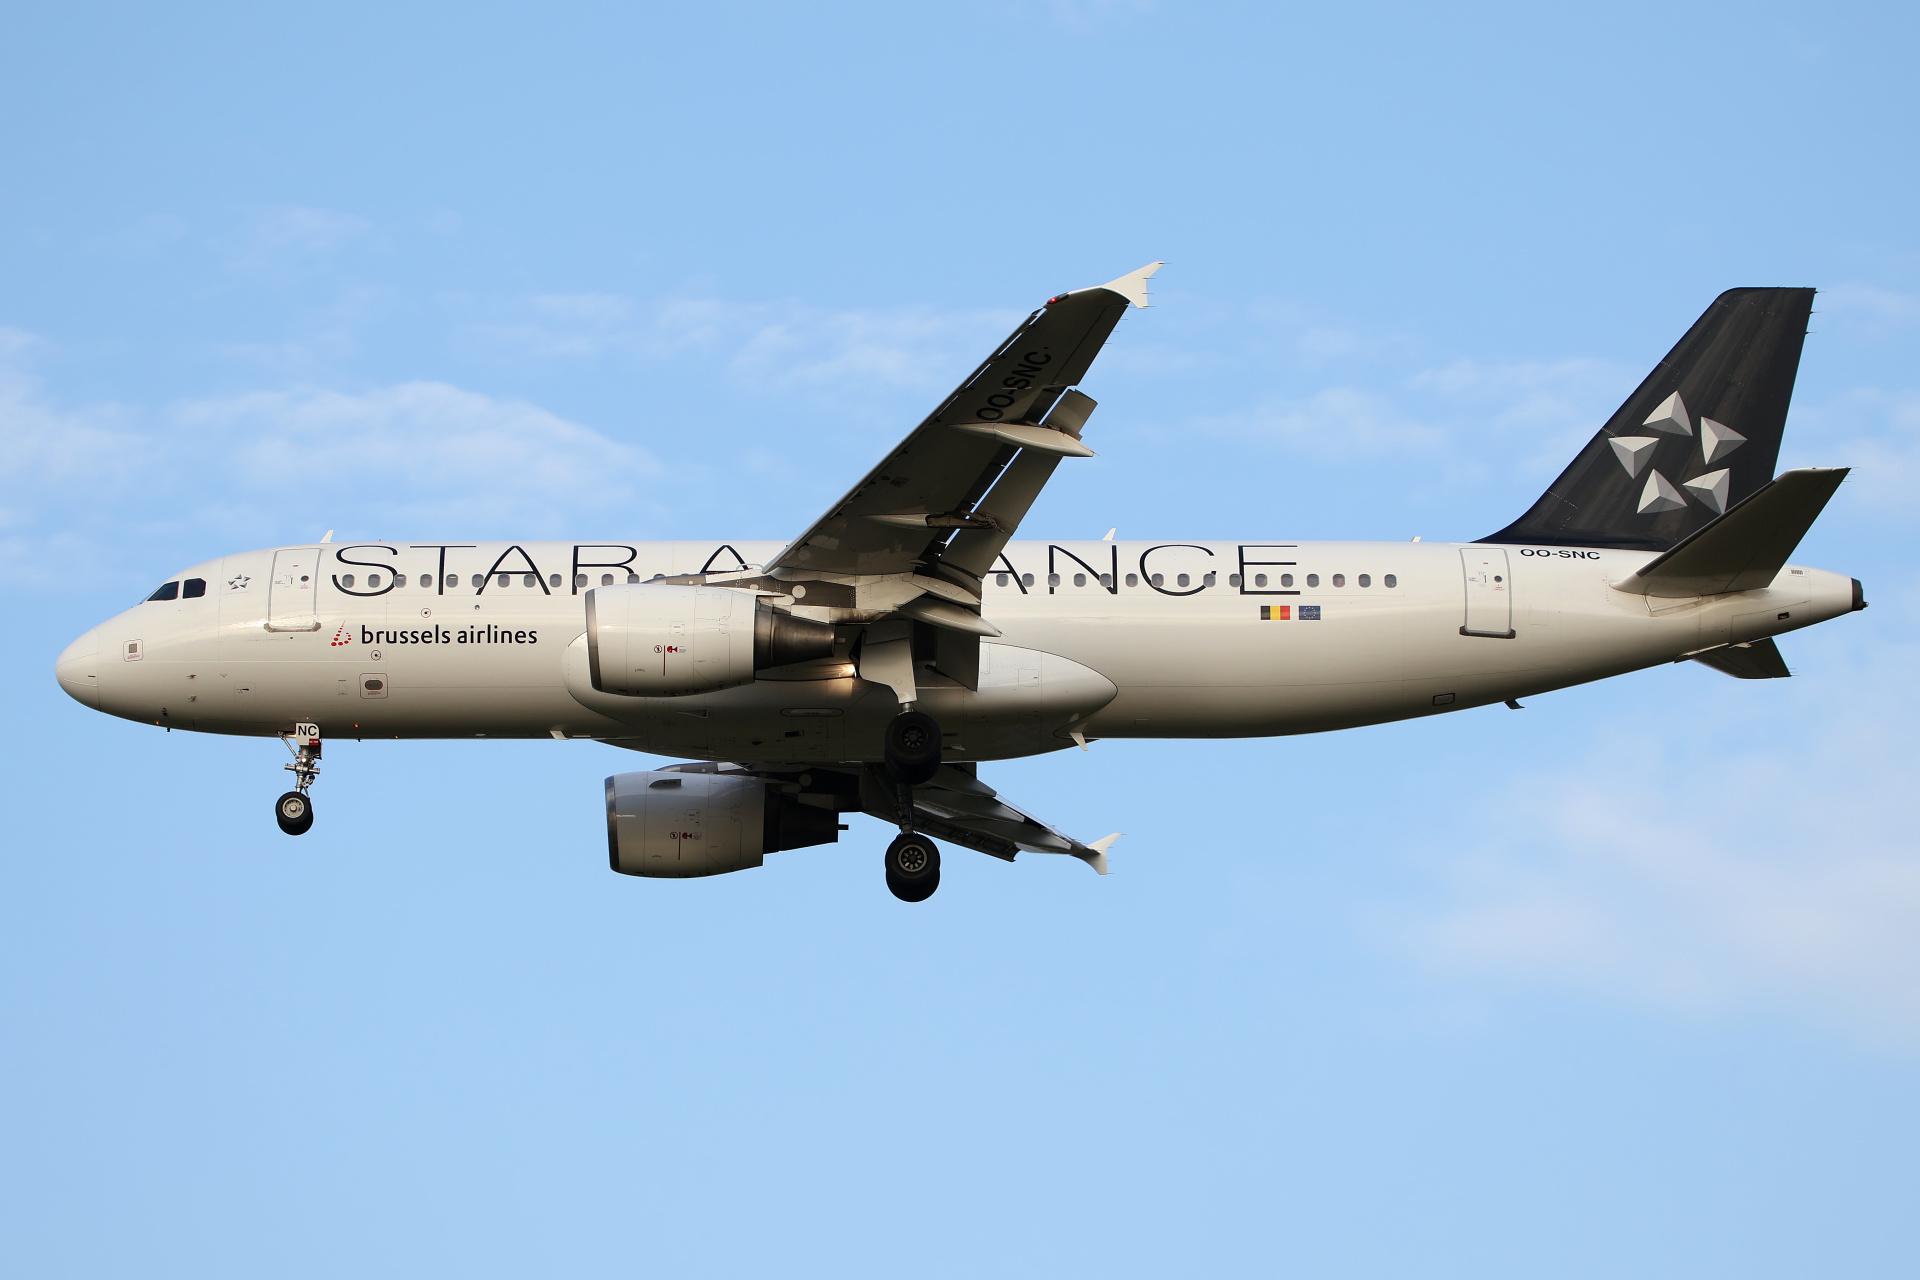 OO-SNC (Star Alliance livery) (Aircraft » EPWA Spotting » Airbus A320-200 » Brussels Airlines)